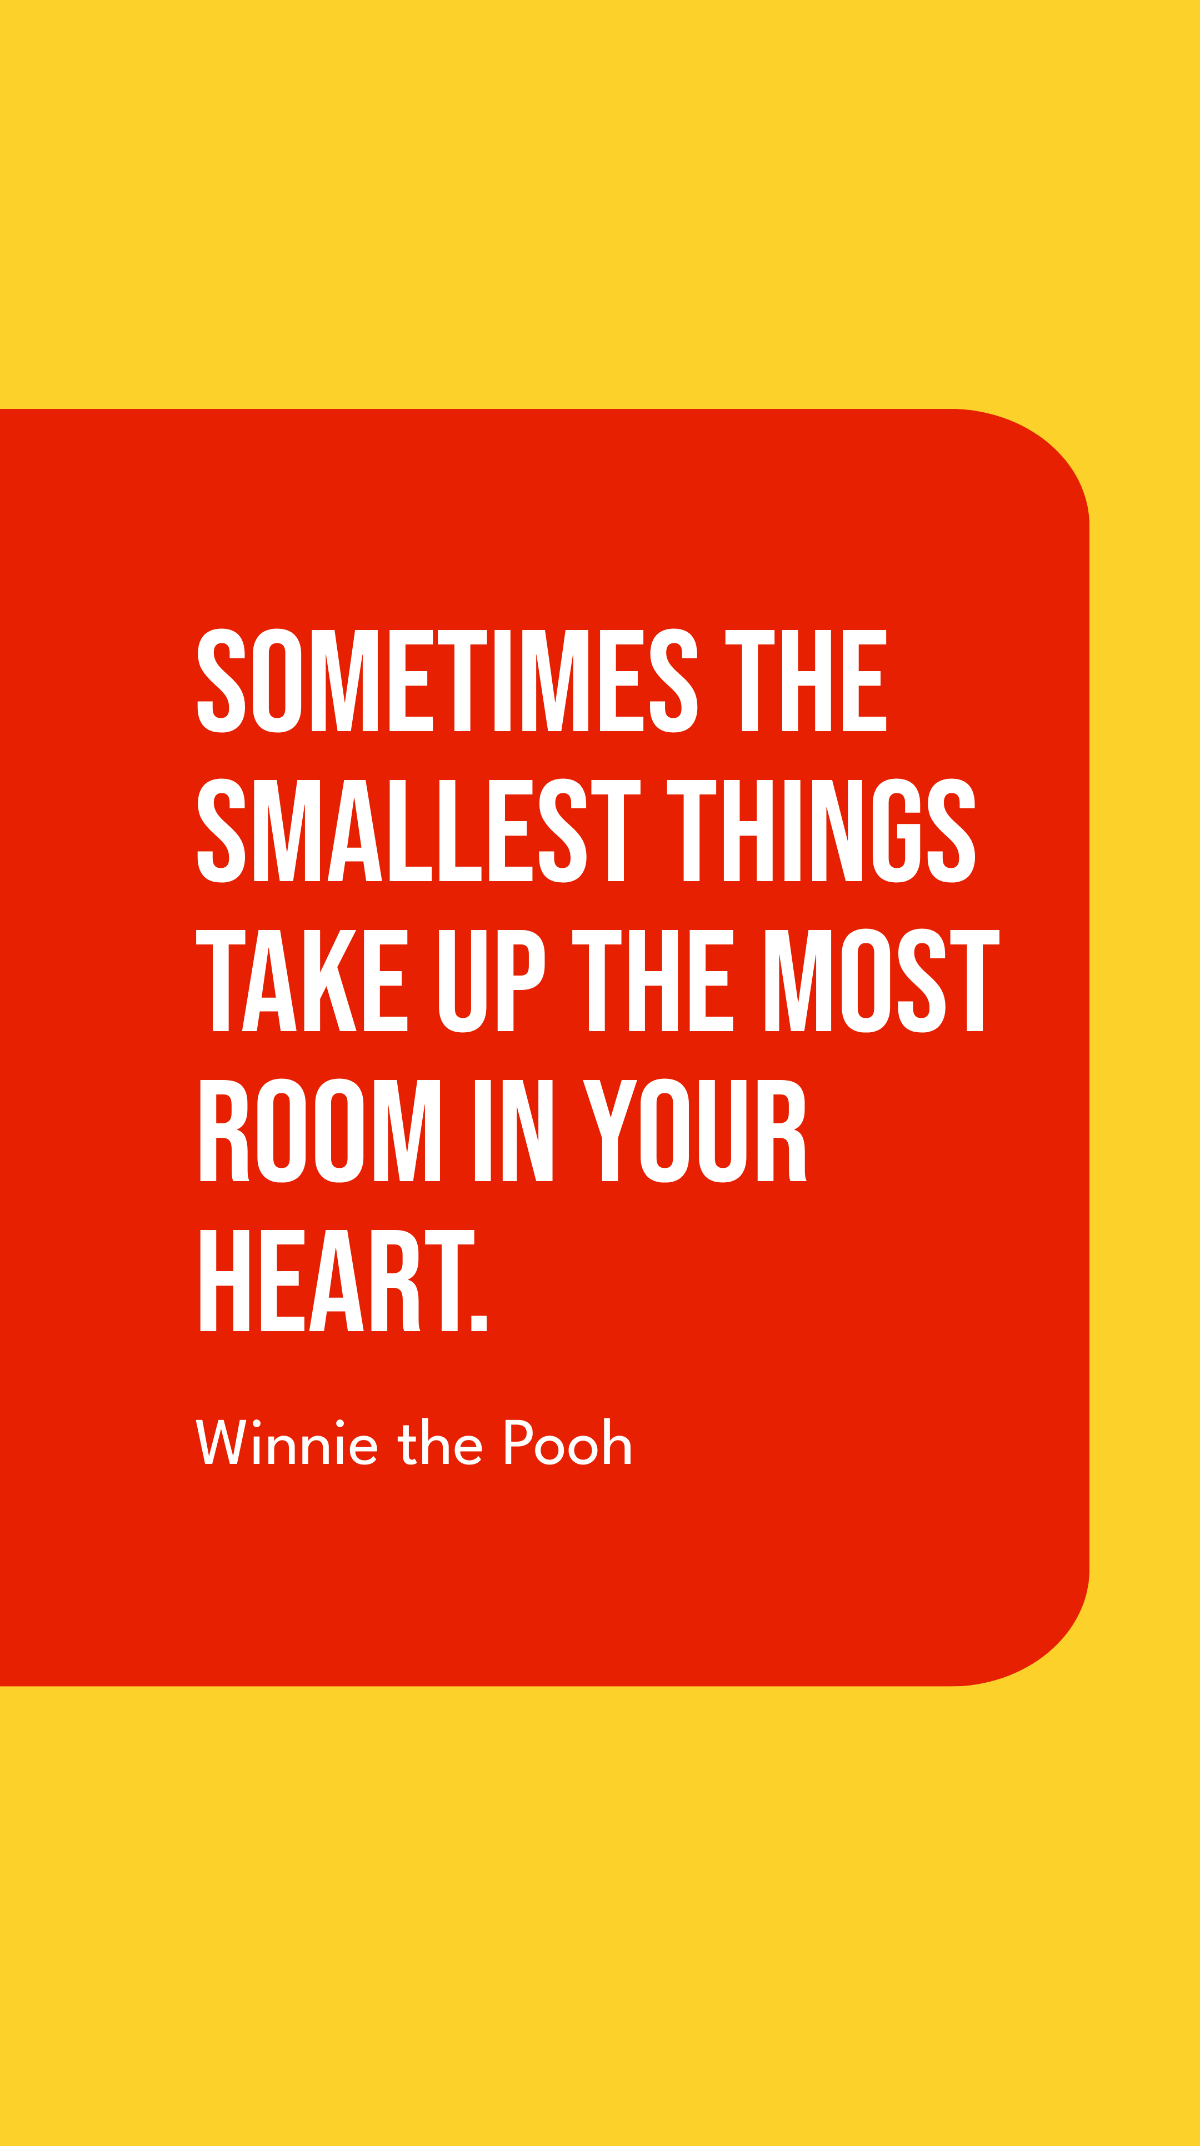 Winnie the Pooh - Sometimes the smallest things take up the most room in your heart.